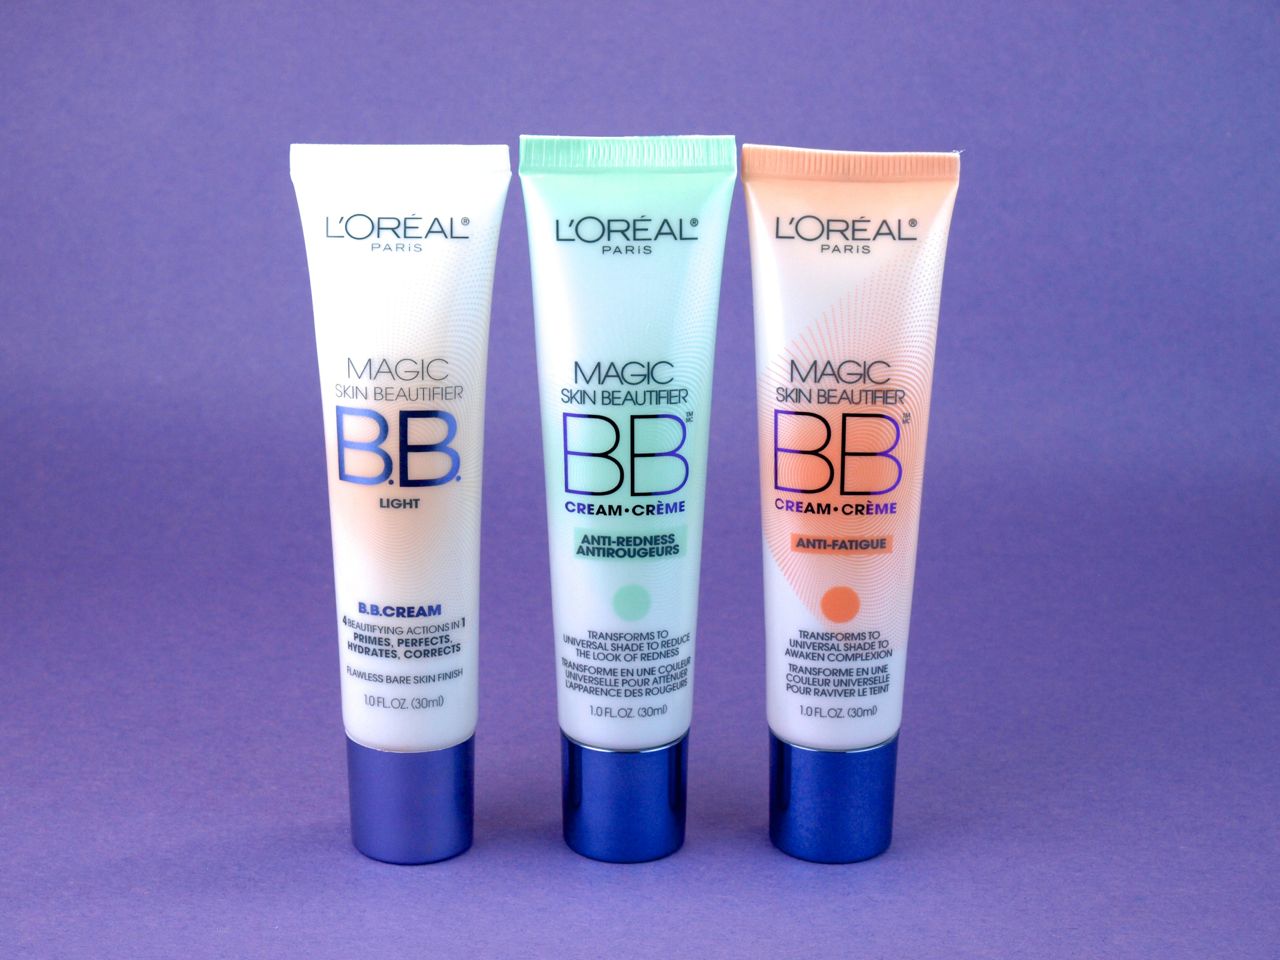 L'Oreal Magic Skin Beautifier BB Cream "Light", "Anti-redness" & "Anti-fatigue": Comparison Review and Swatches | The Sloths: Beauty, Makeup, and Skincare Blog with Reviews and Swatches